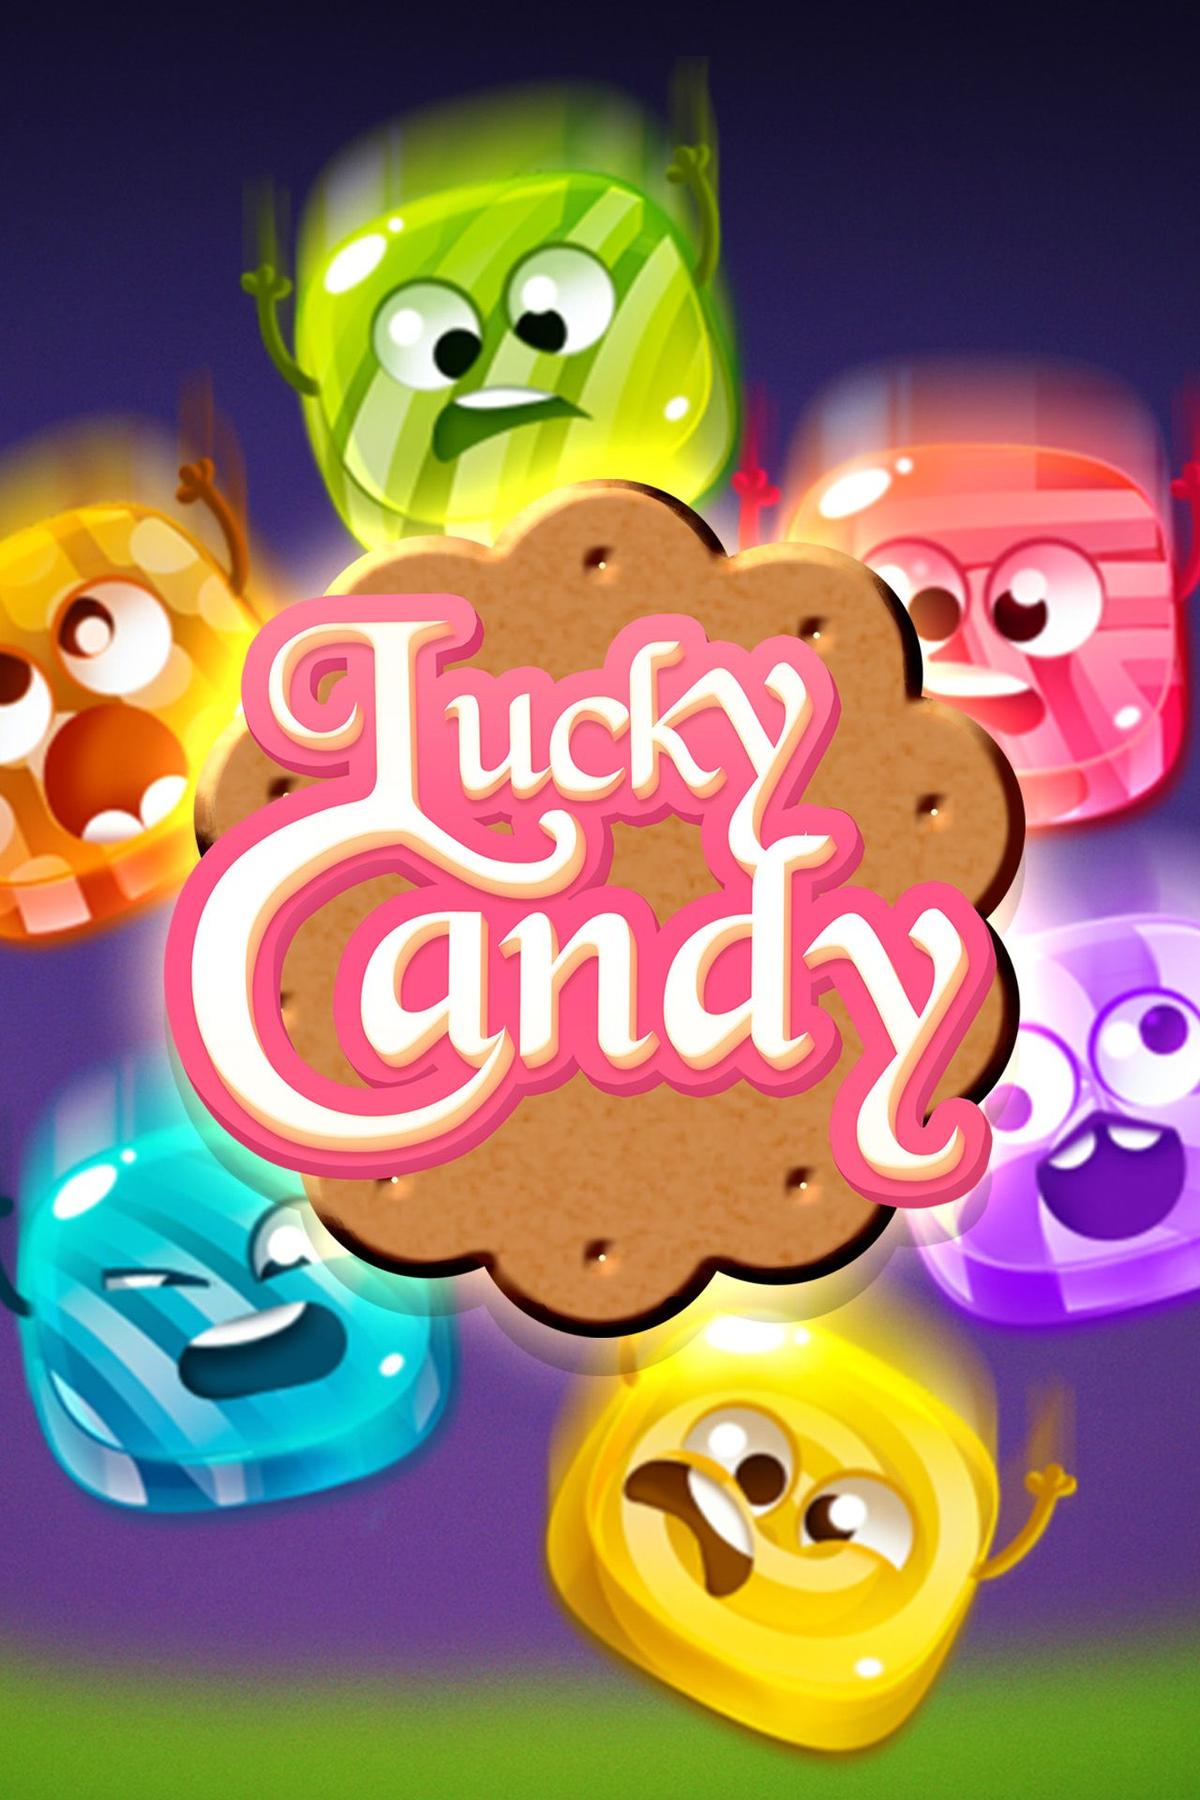 Lucky Candy